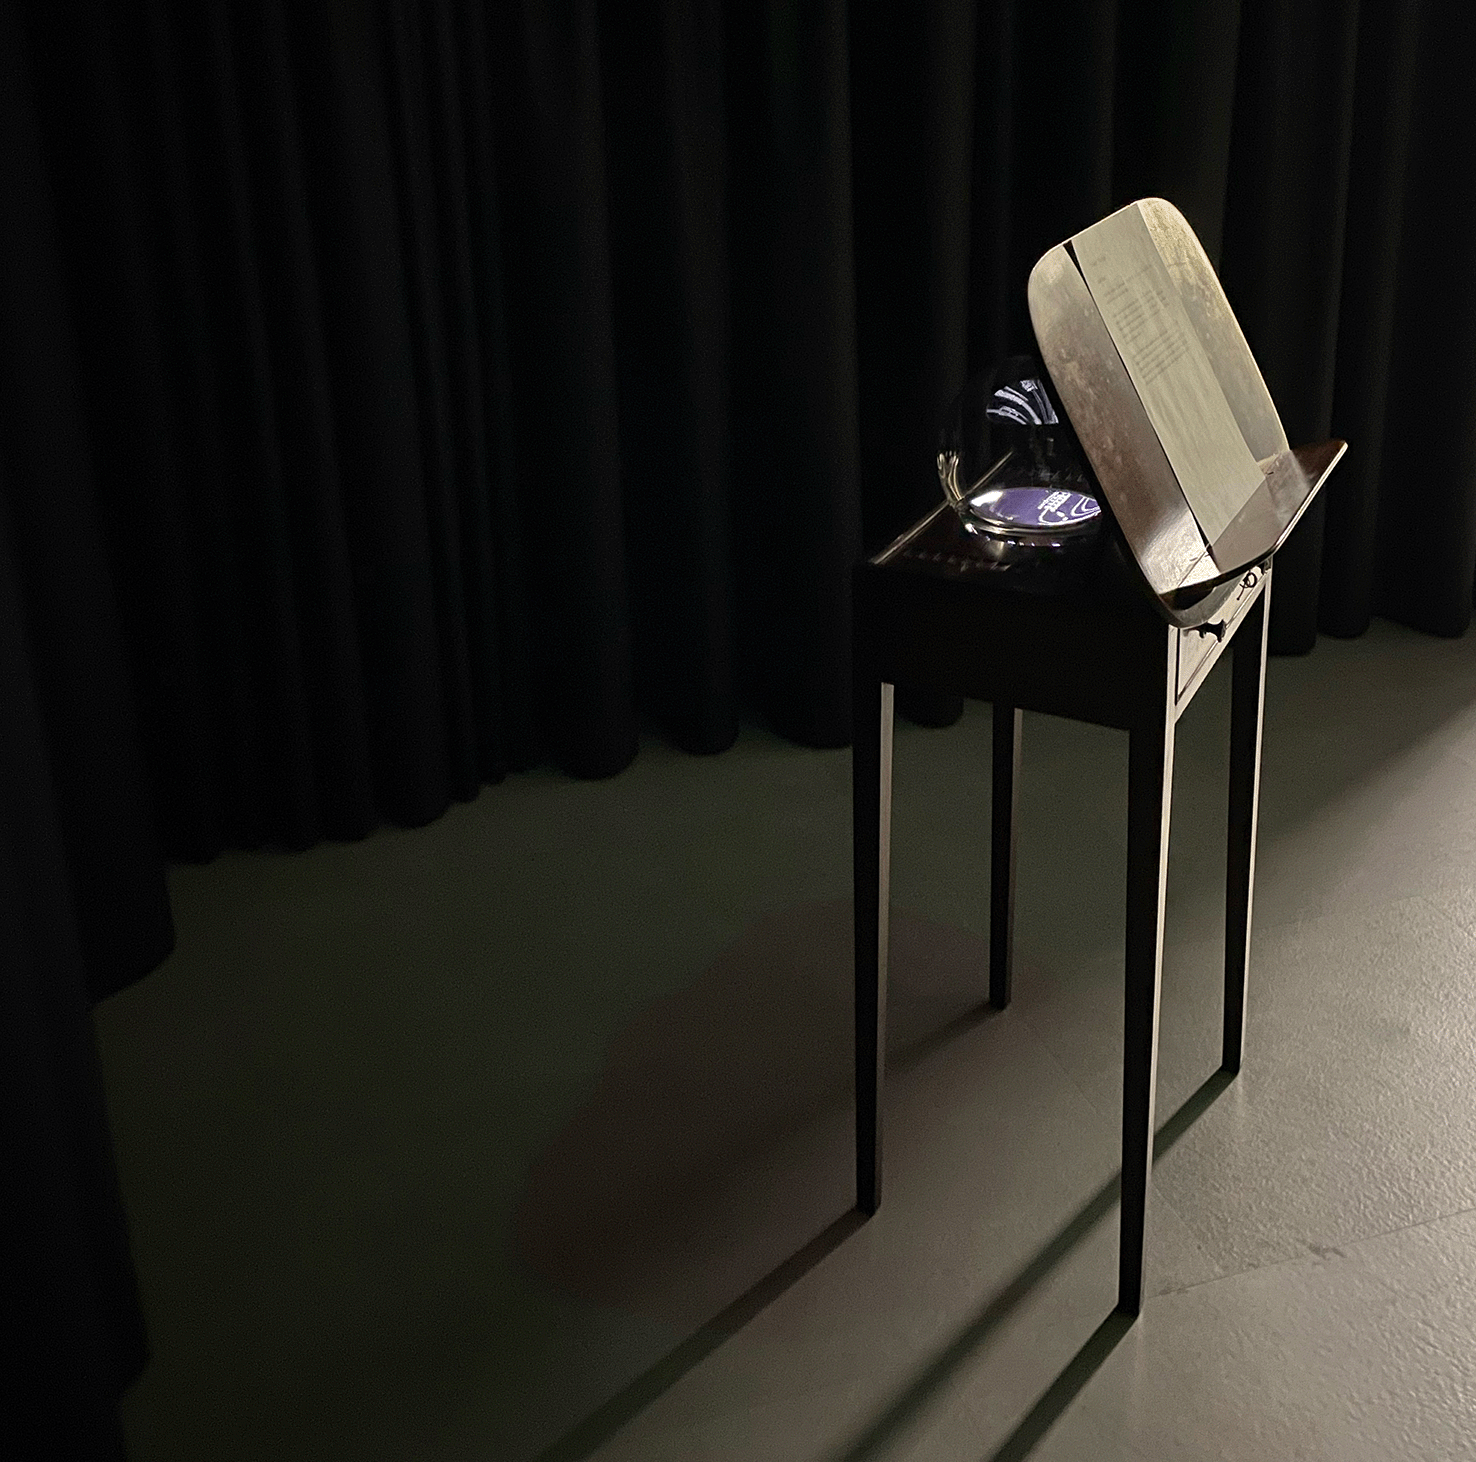 Visions | Vestiges (2023). The notational sculp- ture was assembled from a Victorian-Era music stand, a handblown glass sphere, water, and an iPad displaying animated notation generated in the Decibel ScorePlayer.